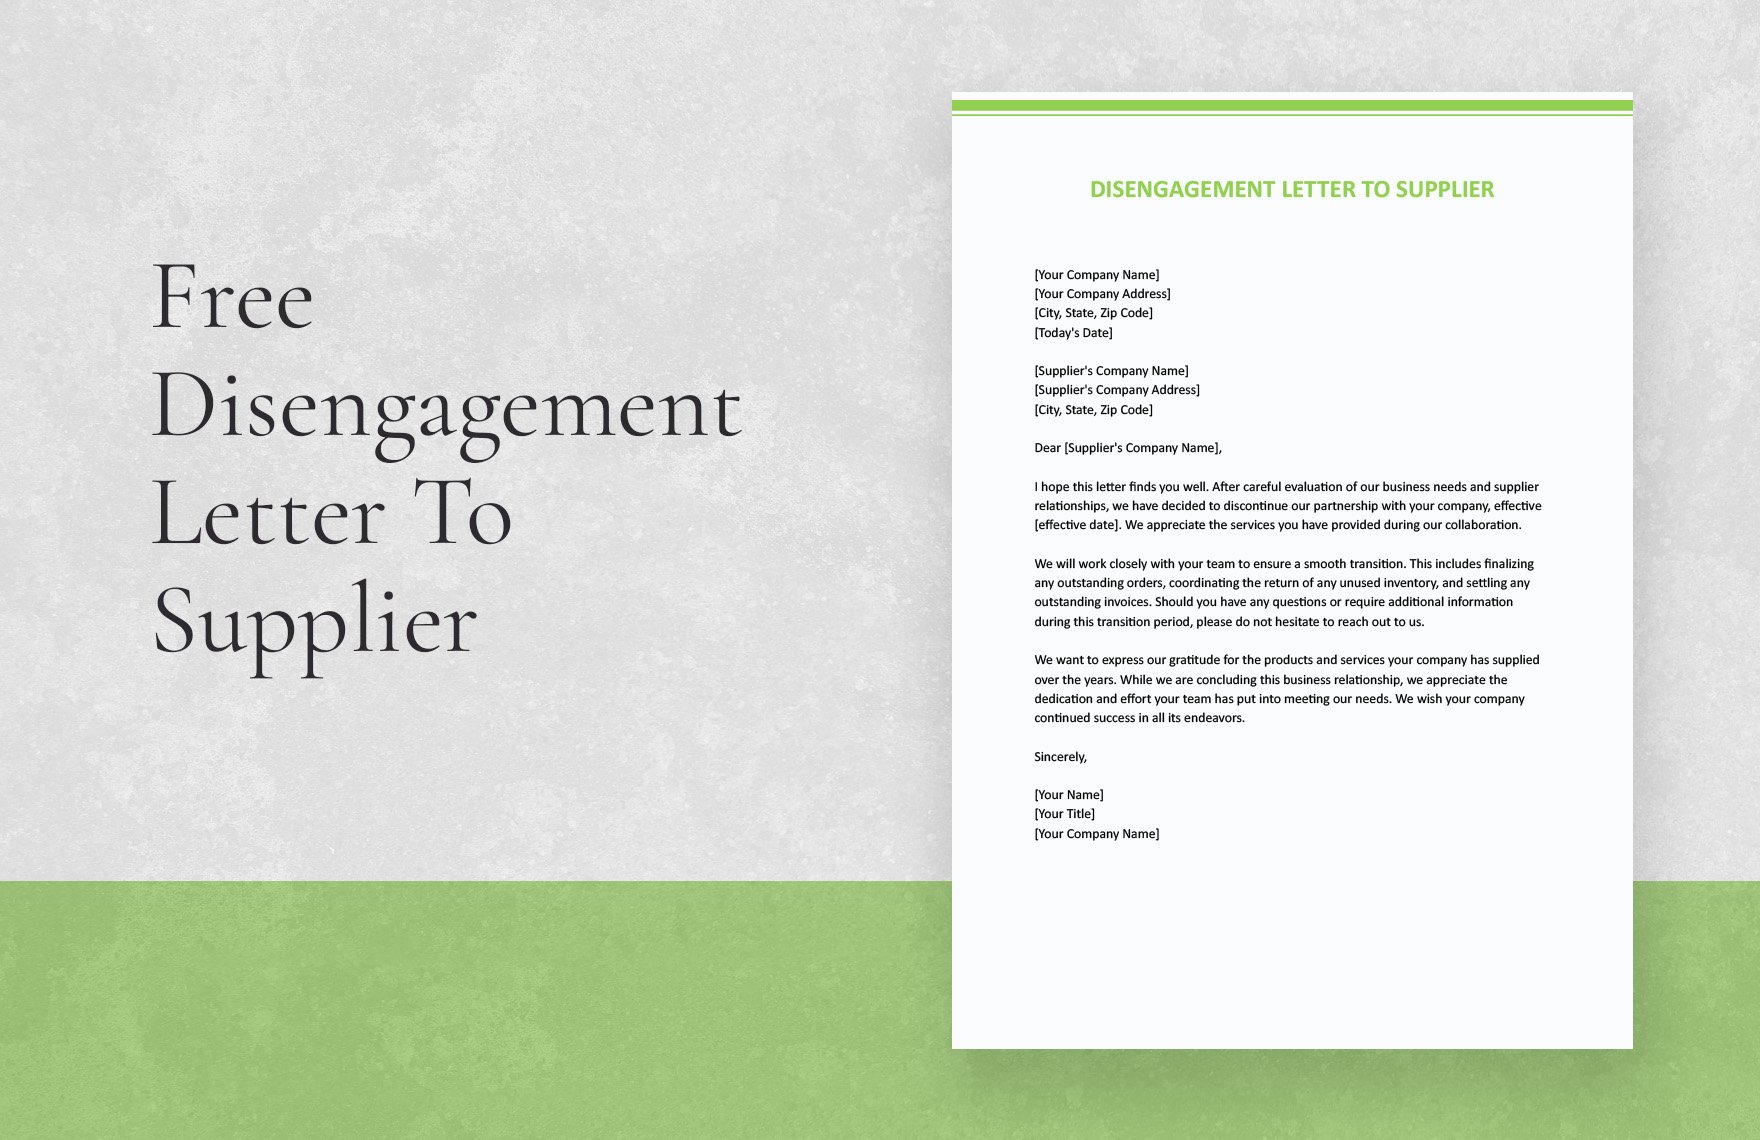 Disengagement Letter To Supplier in Word, Google Docs